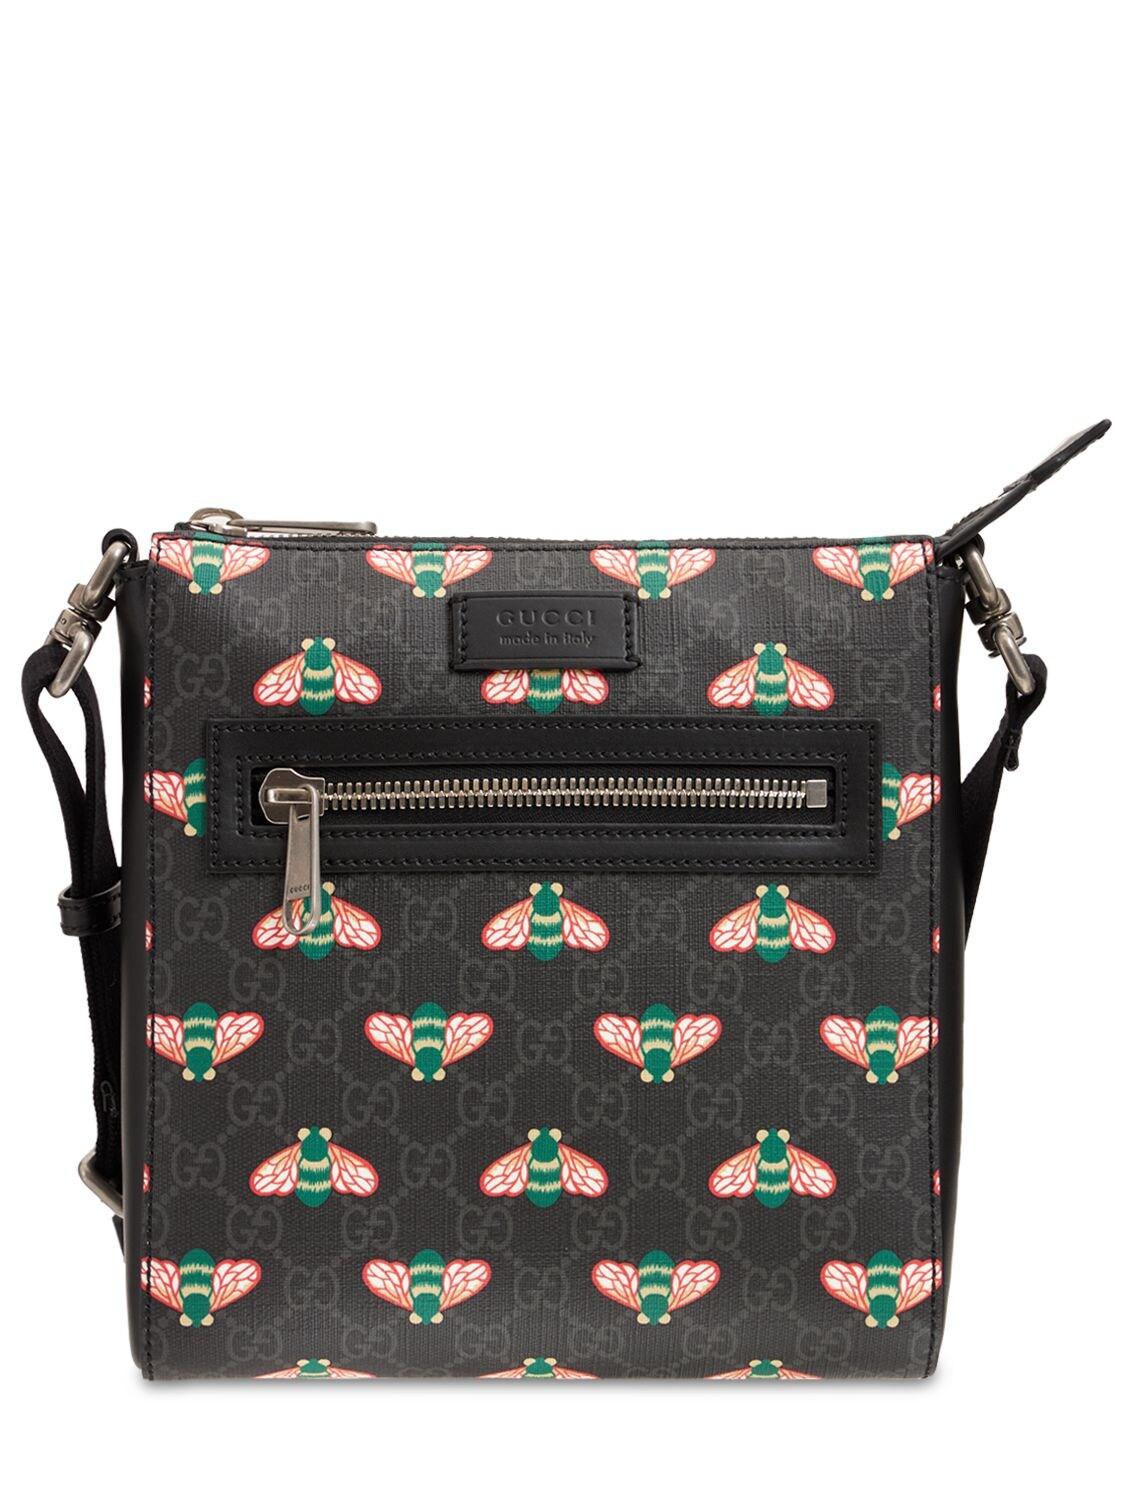 Gucci, Bags, Gucci Black Leather Bestiary Bee Gg Supreme Black Canvas  Cross Body Phone Bag